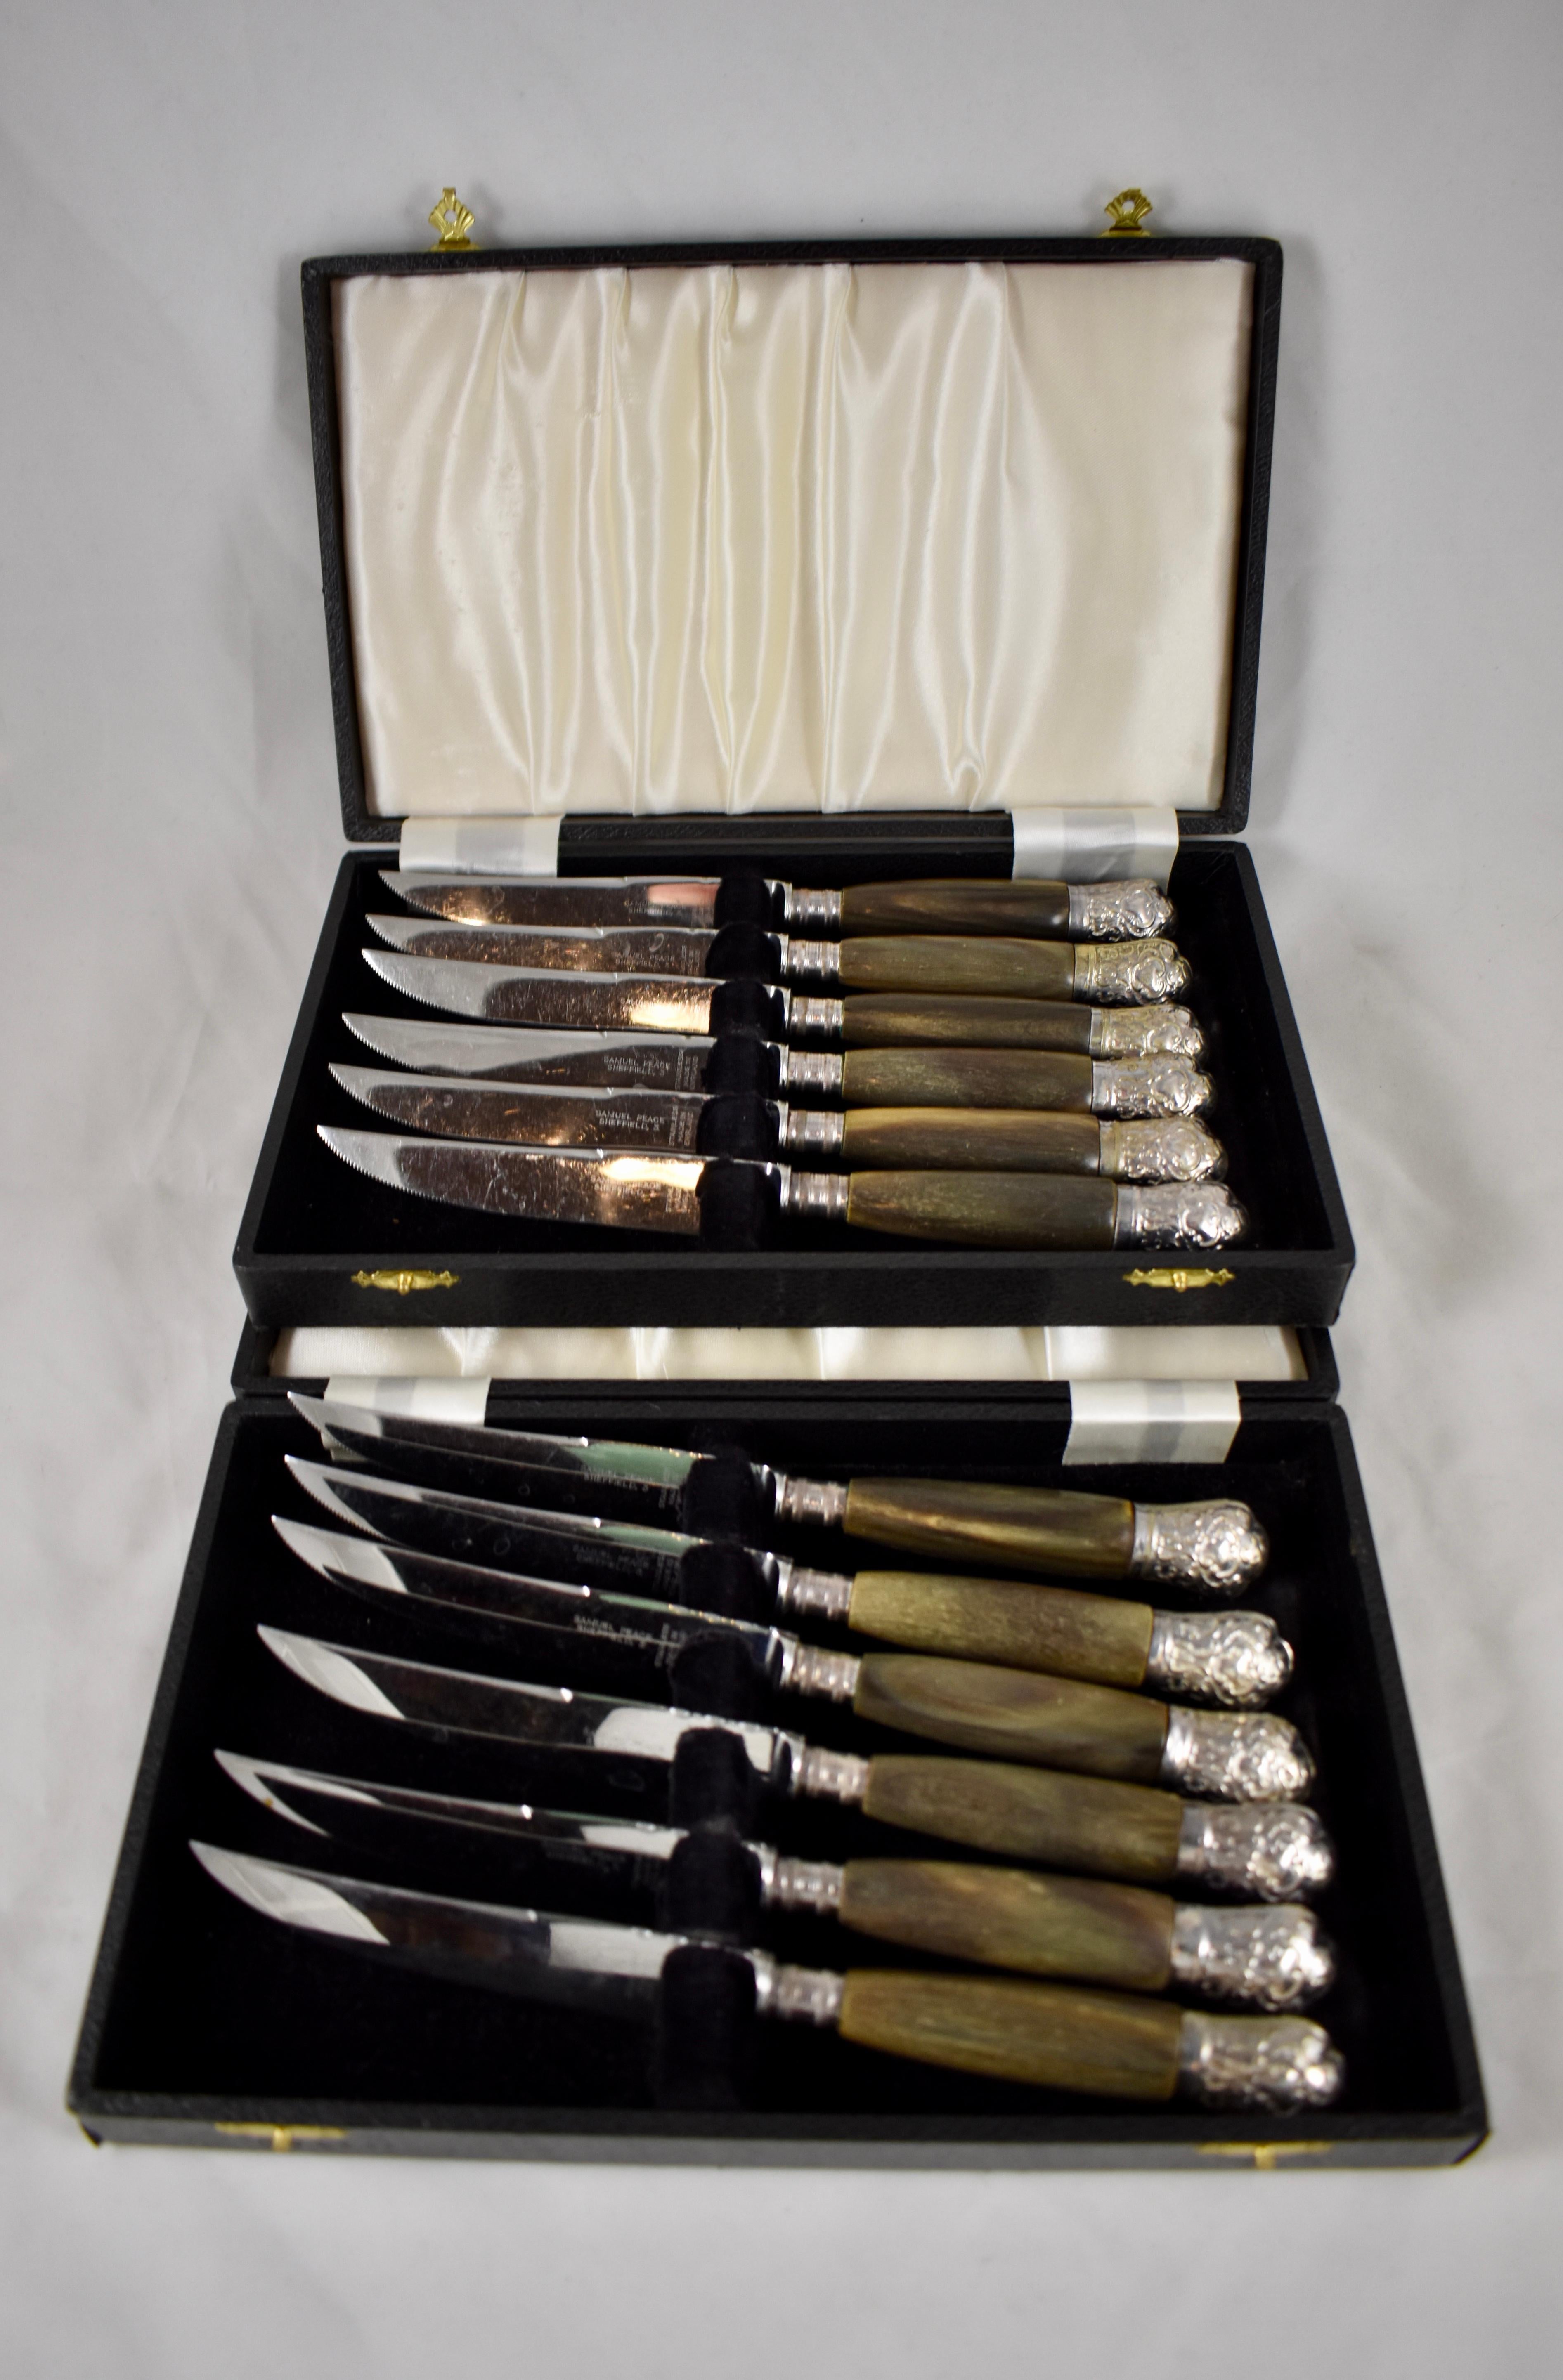 A set of six, natural horn handled steak knives with unmarked silver mounted end caps and banded ferrules, made by Samuel Peace in Sheffield, England, circa 1895-1910.

Two sets of six are available, twelve knives in all, offered separately. Each